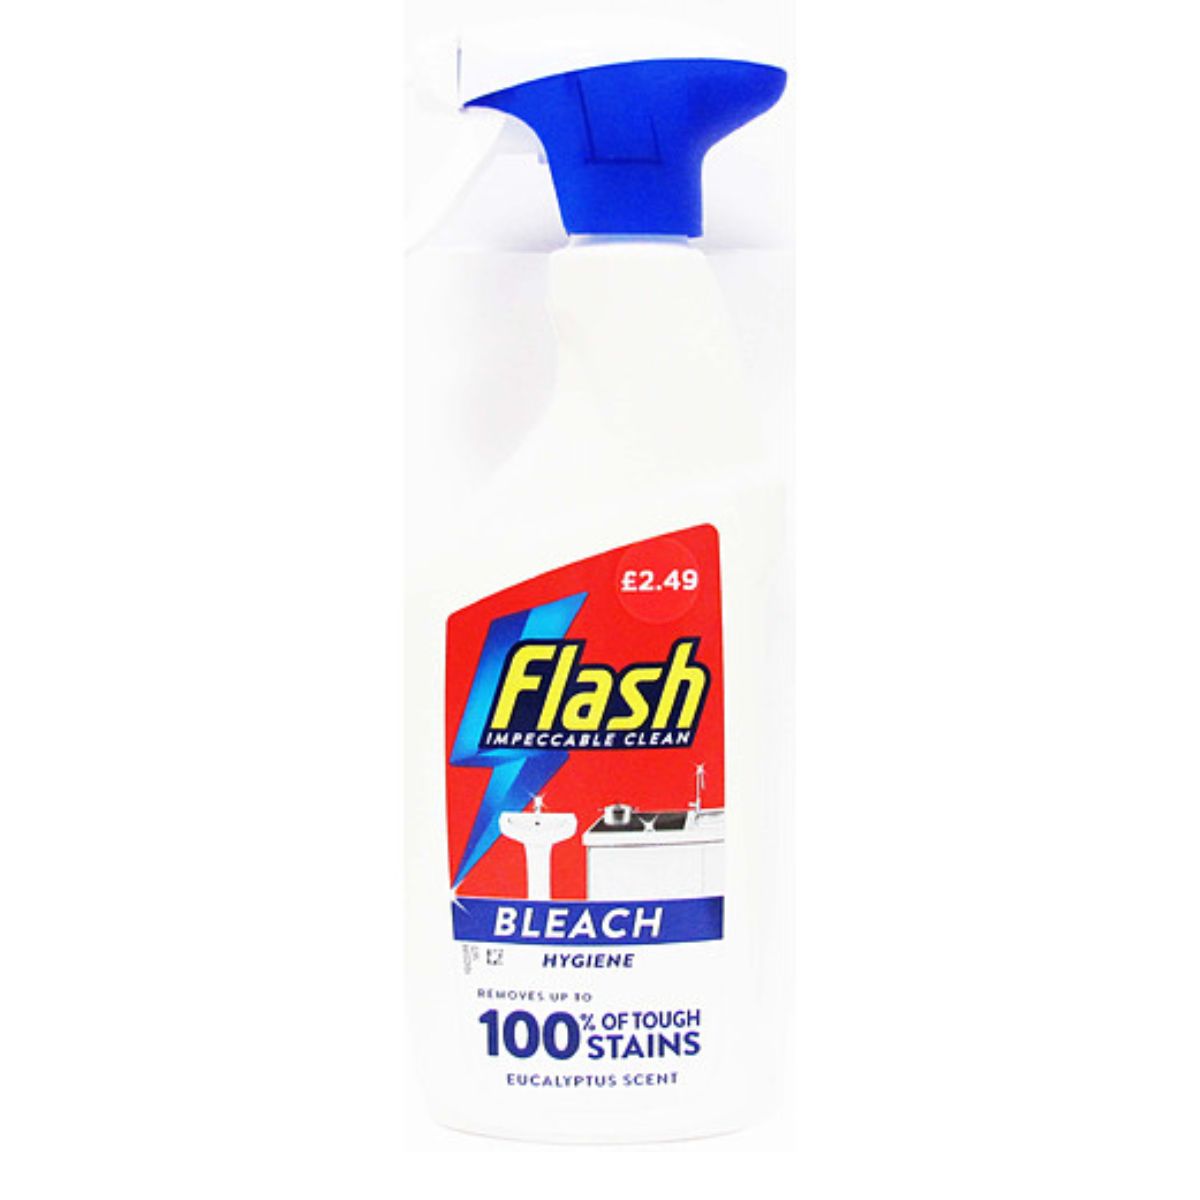 A bottle of Flash - Spray Plus Bleach - 500ml on a white background.